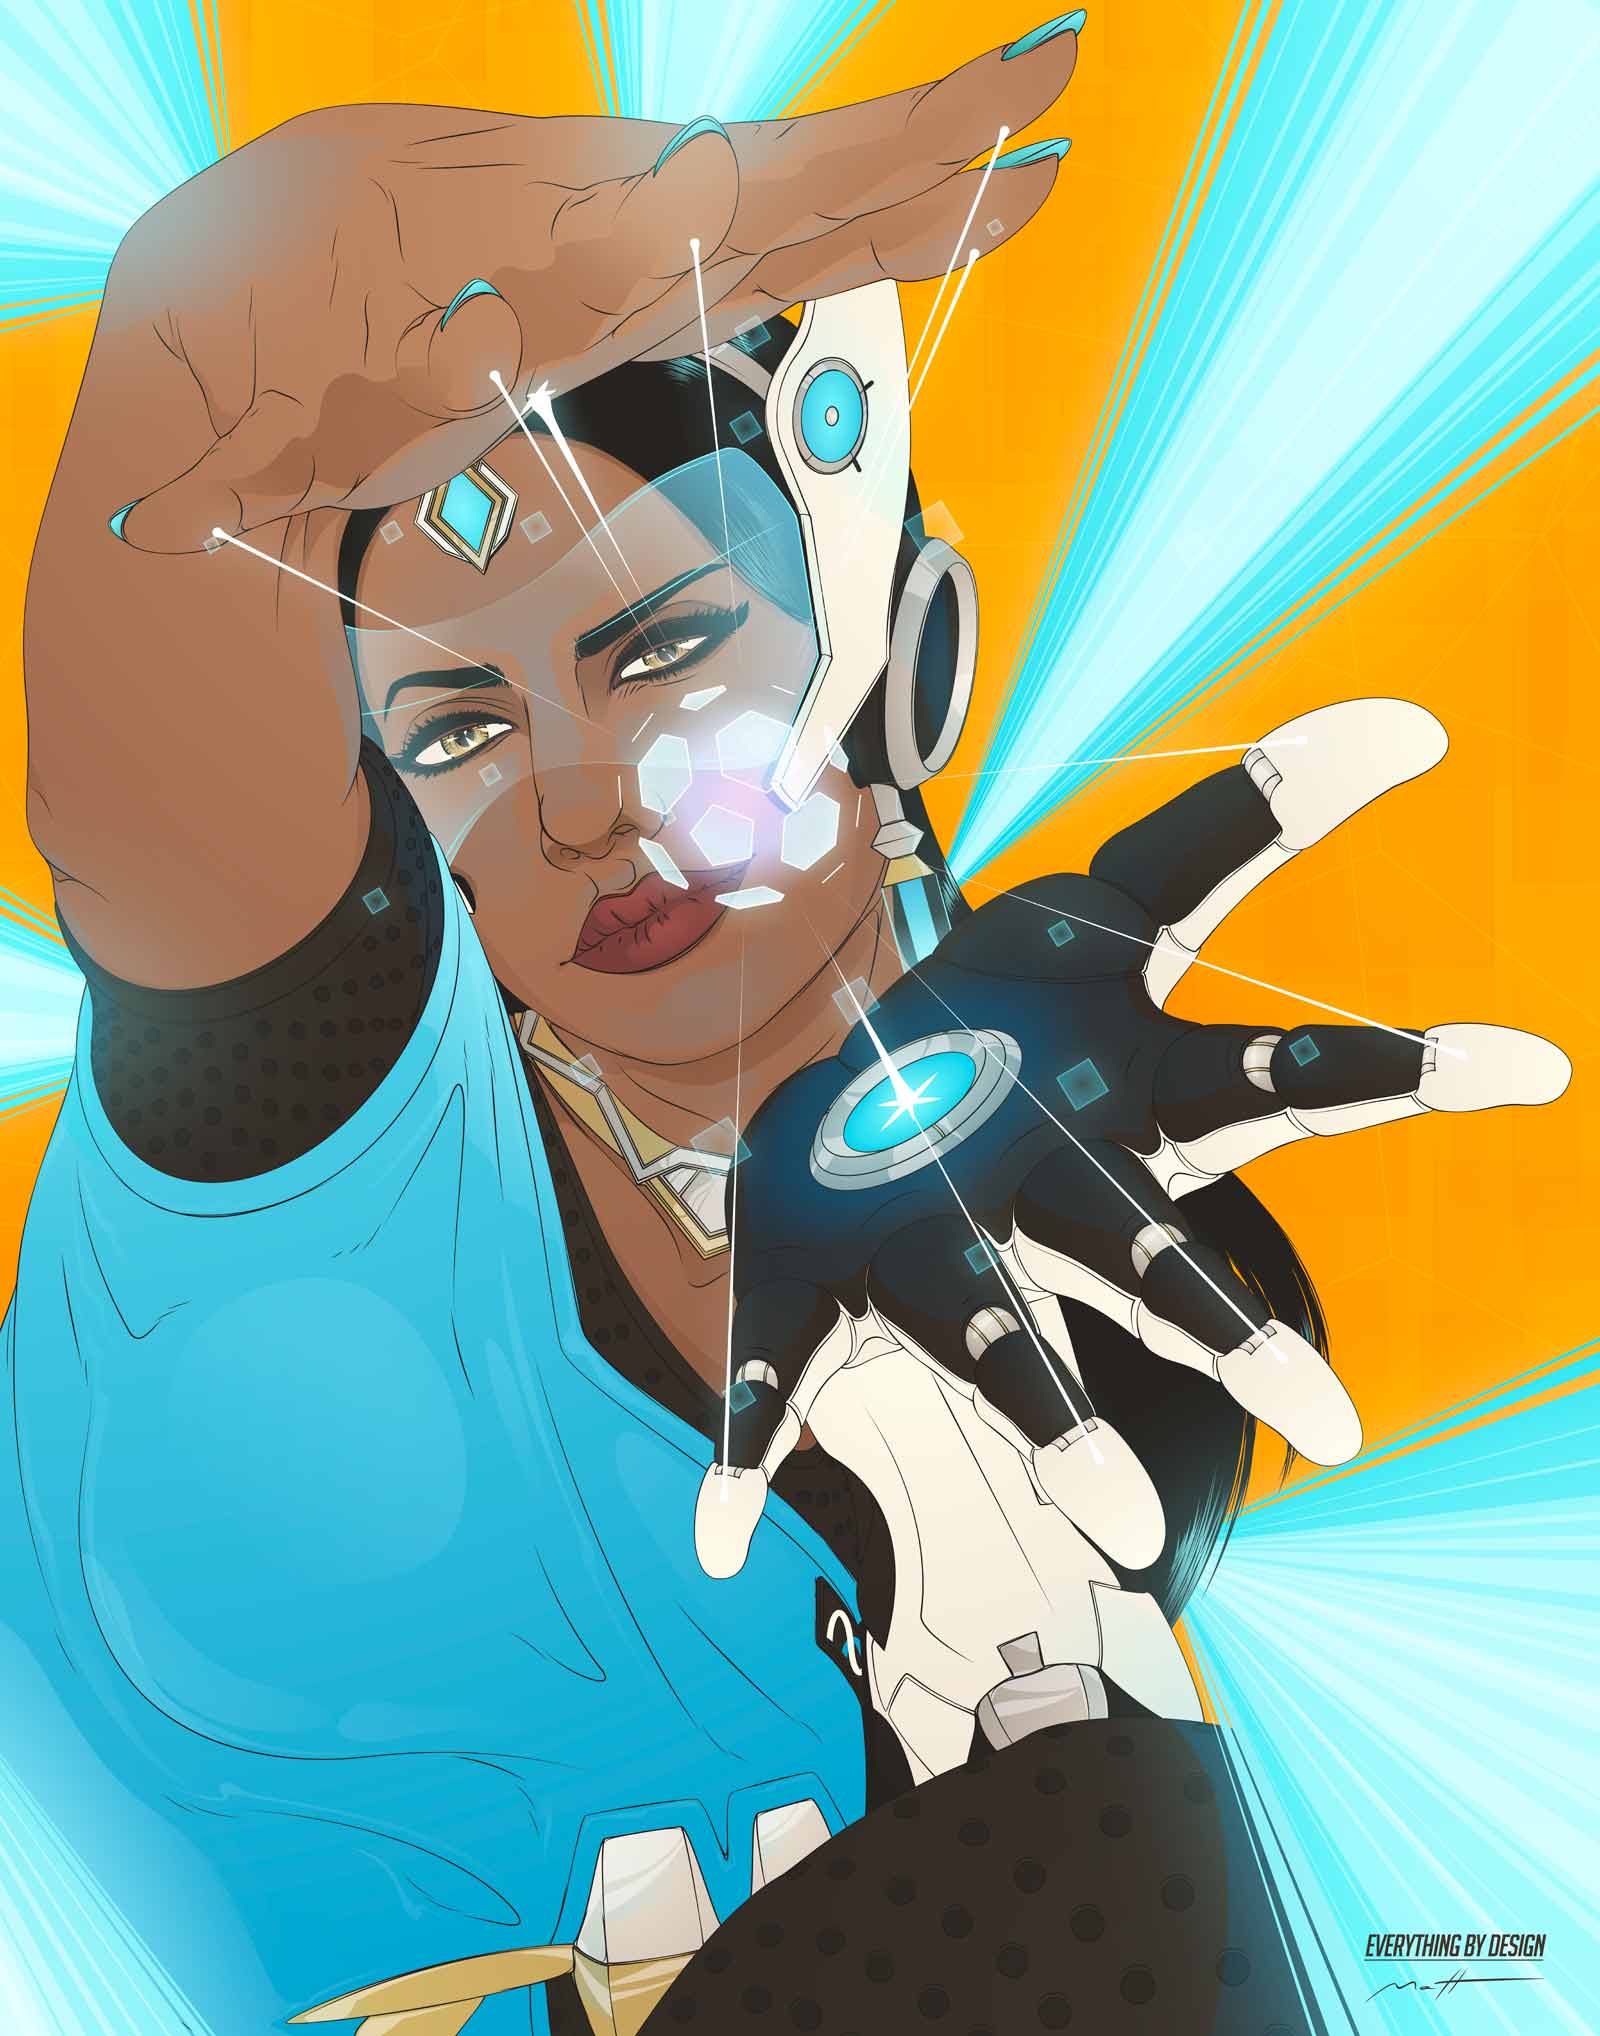 Everything by Design (Symmetra, Overwatch)